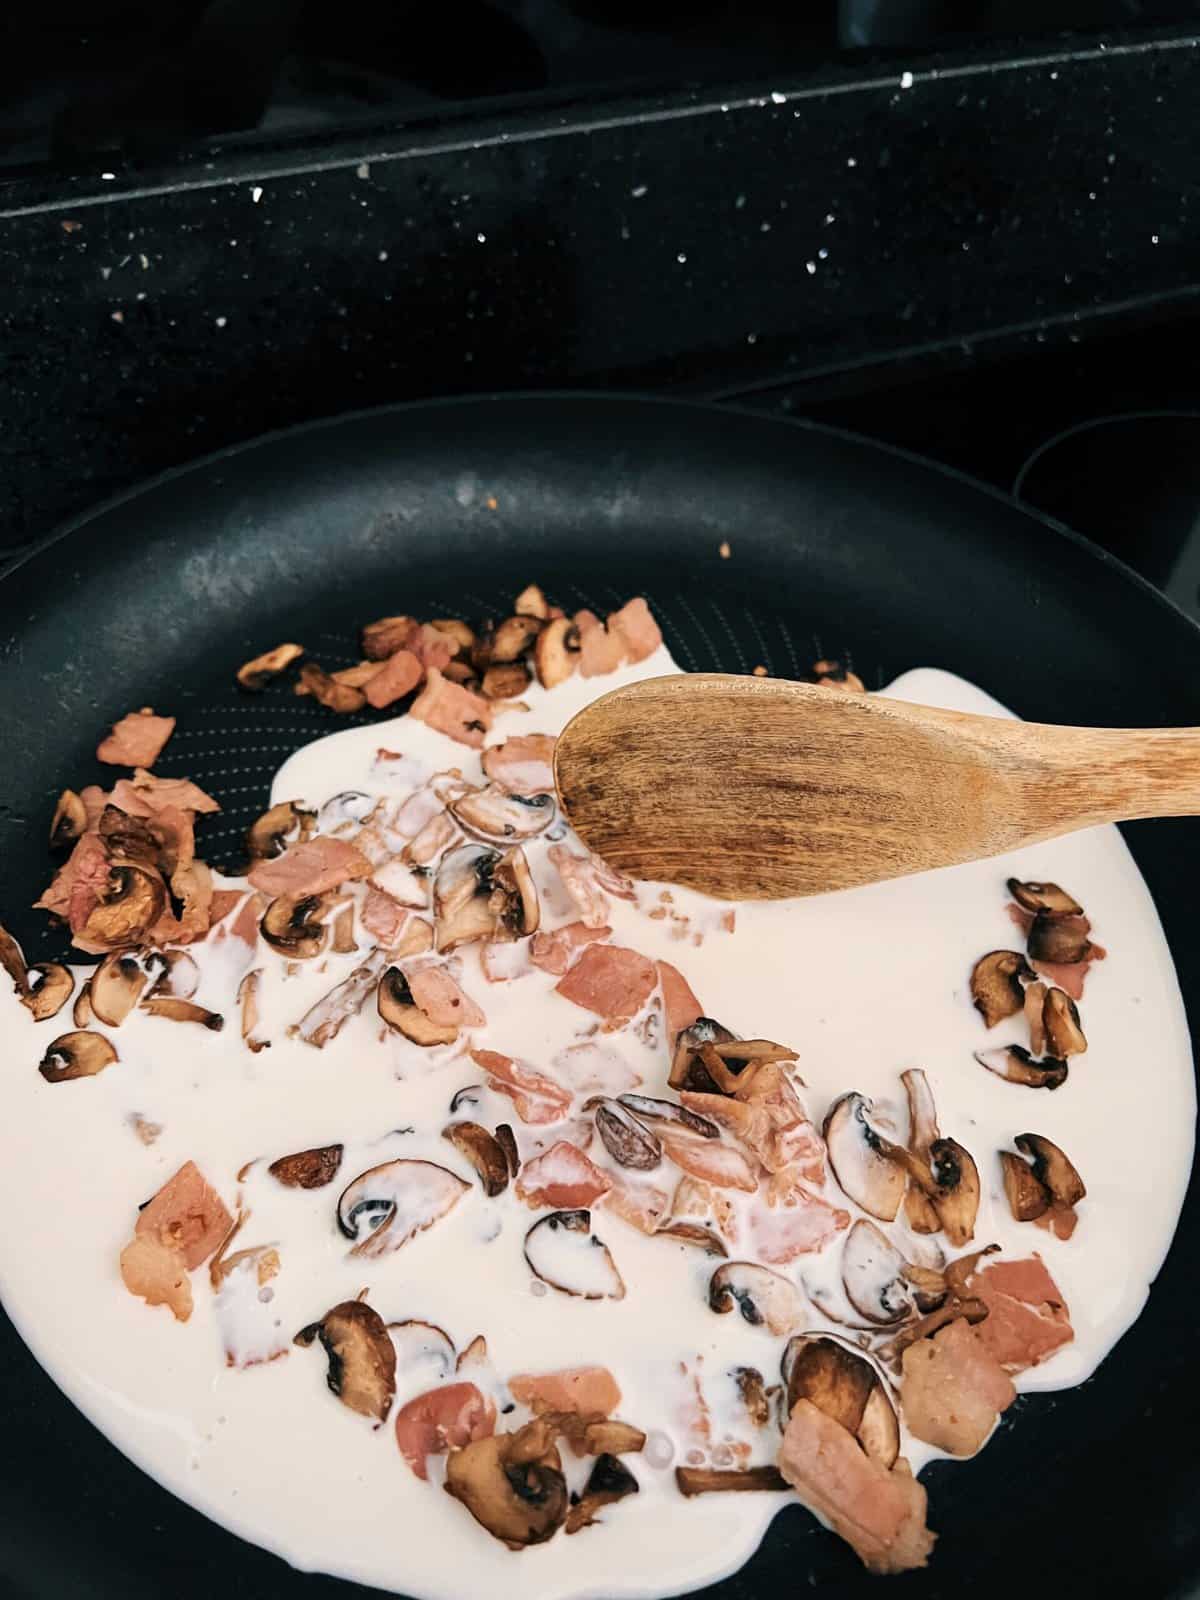 oatly cream bacon and mushroom in a frying pan